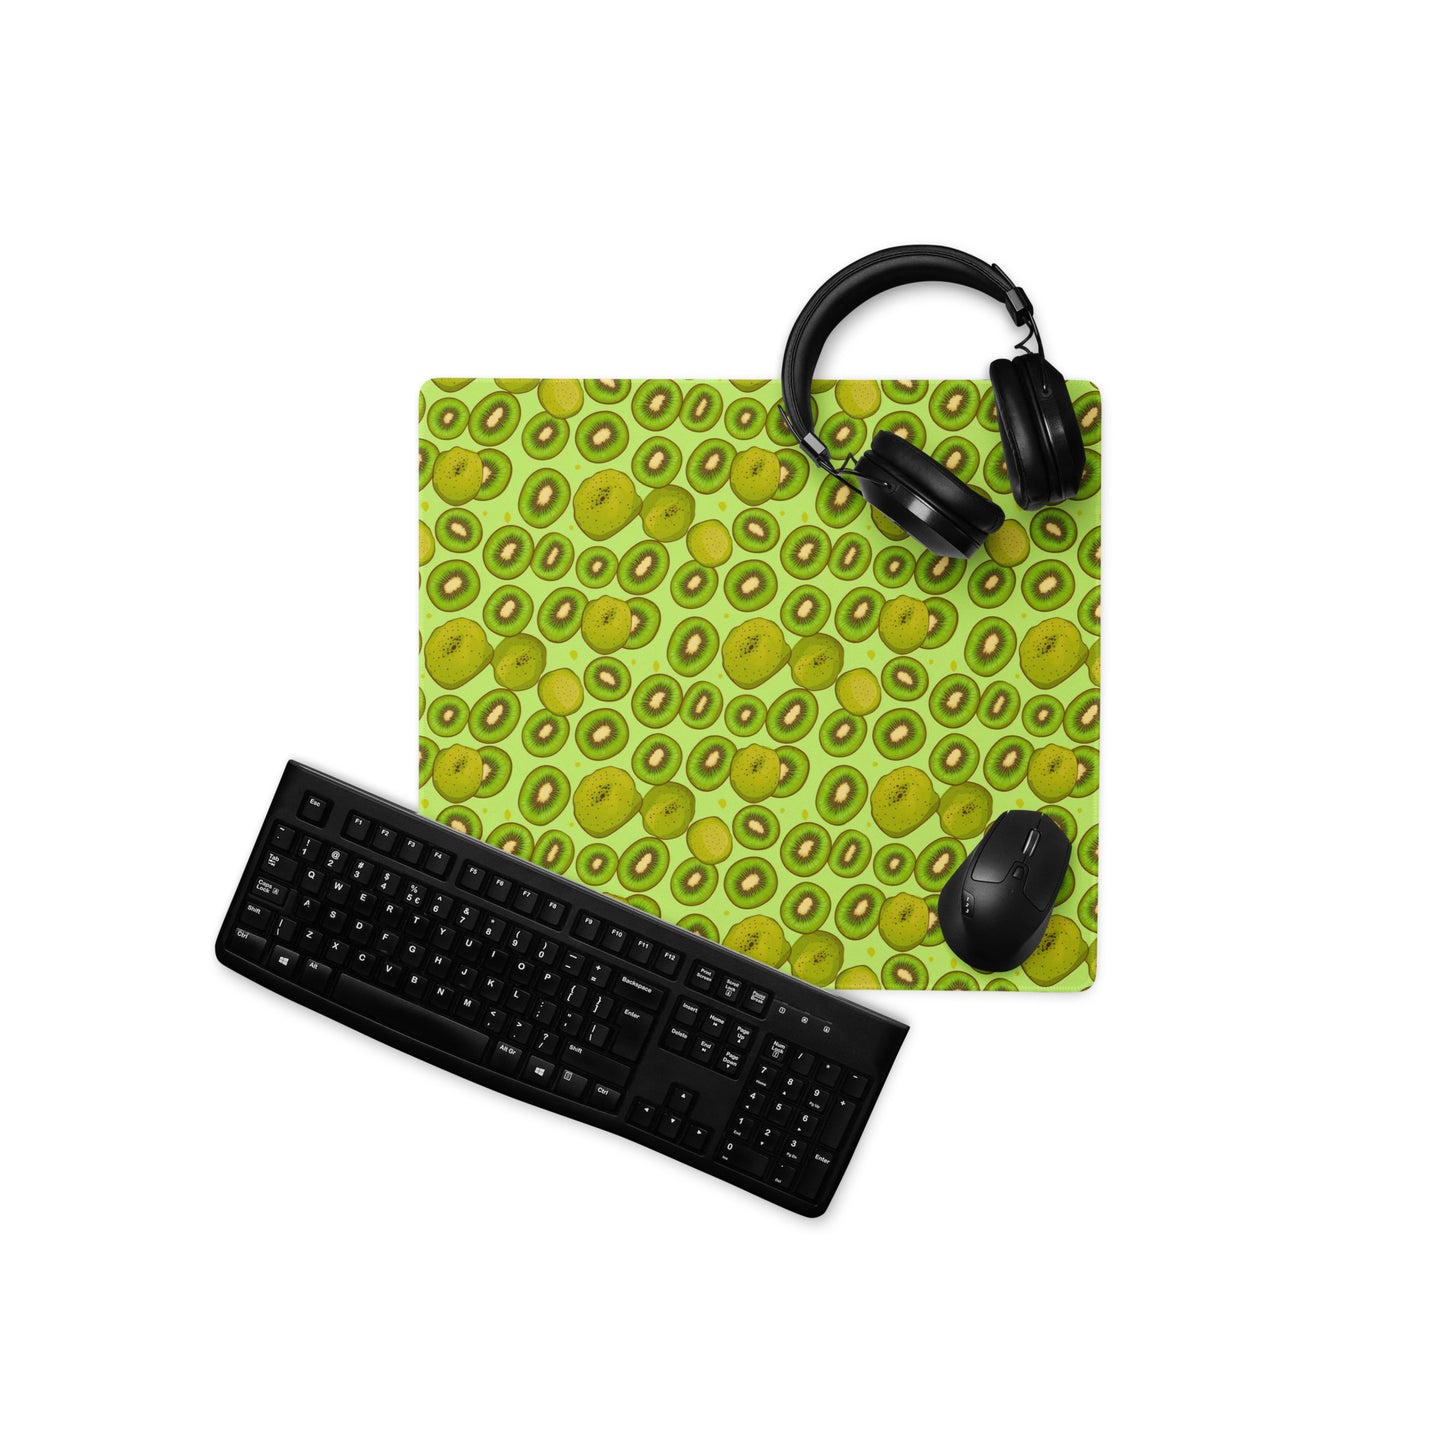 A 18" x 16" desk pad with Kiwis all over it displayed with a keyboard, headphones and a mouse on it. Green in color.